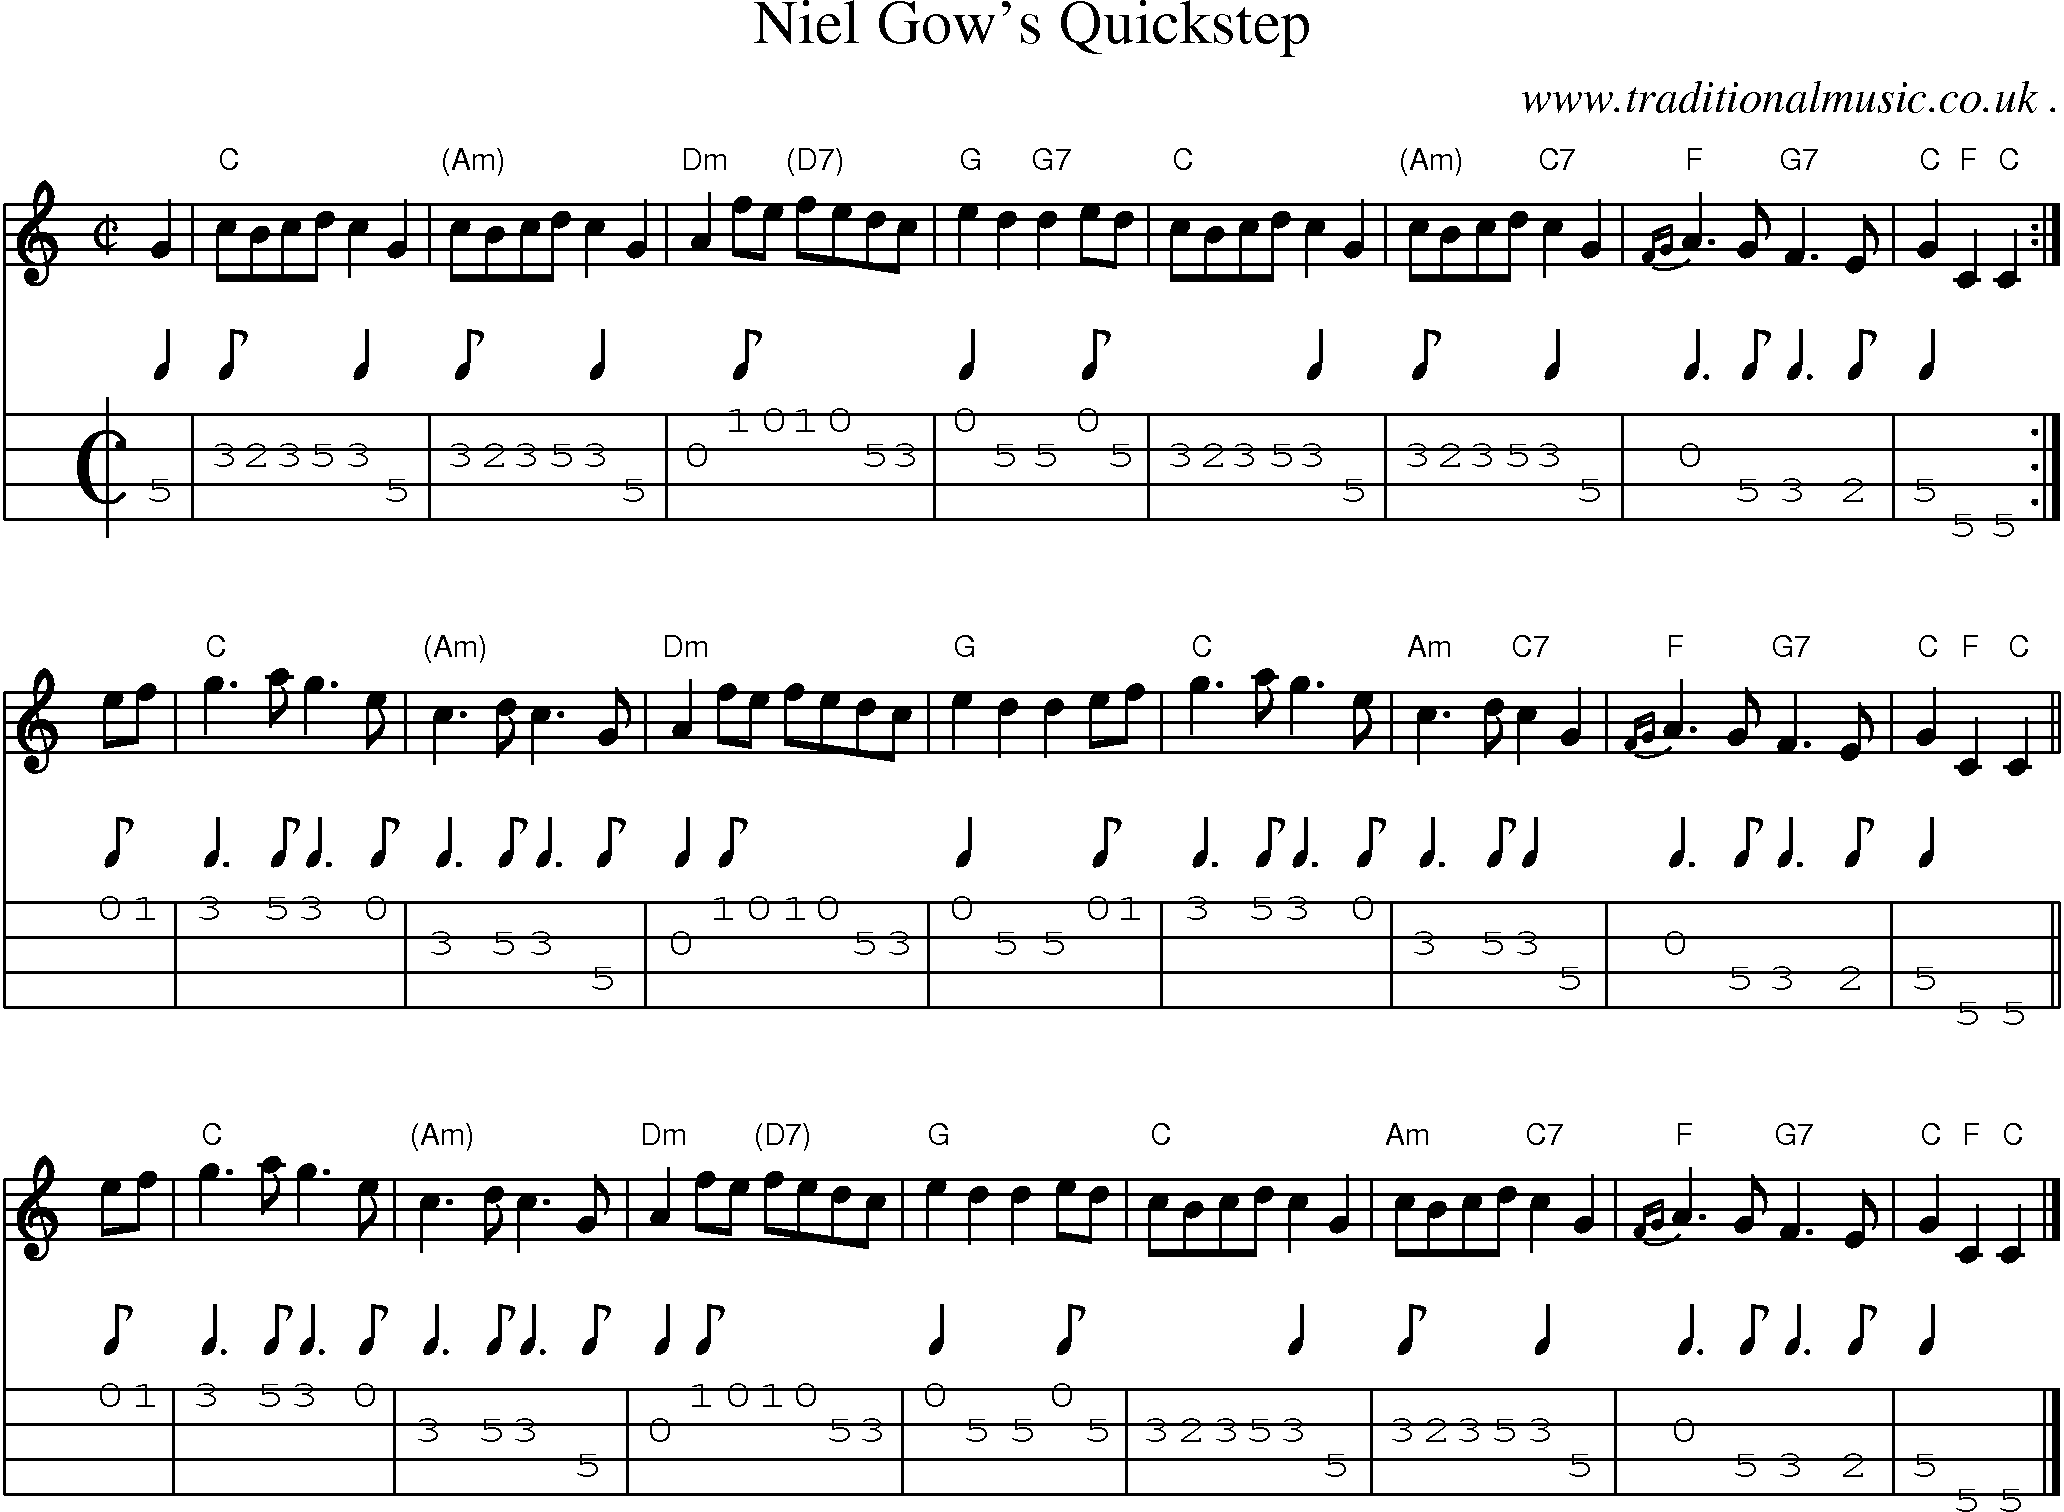 Sheet-music  score, Chords and Mandolin Tabs for Niel Gows Quickstep